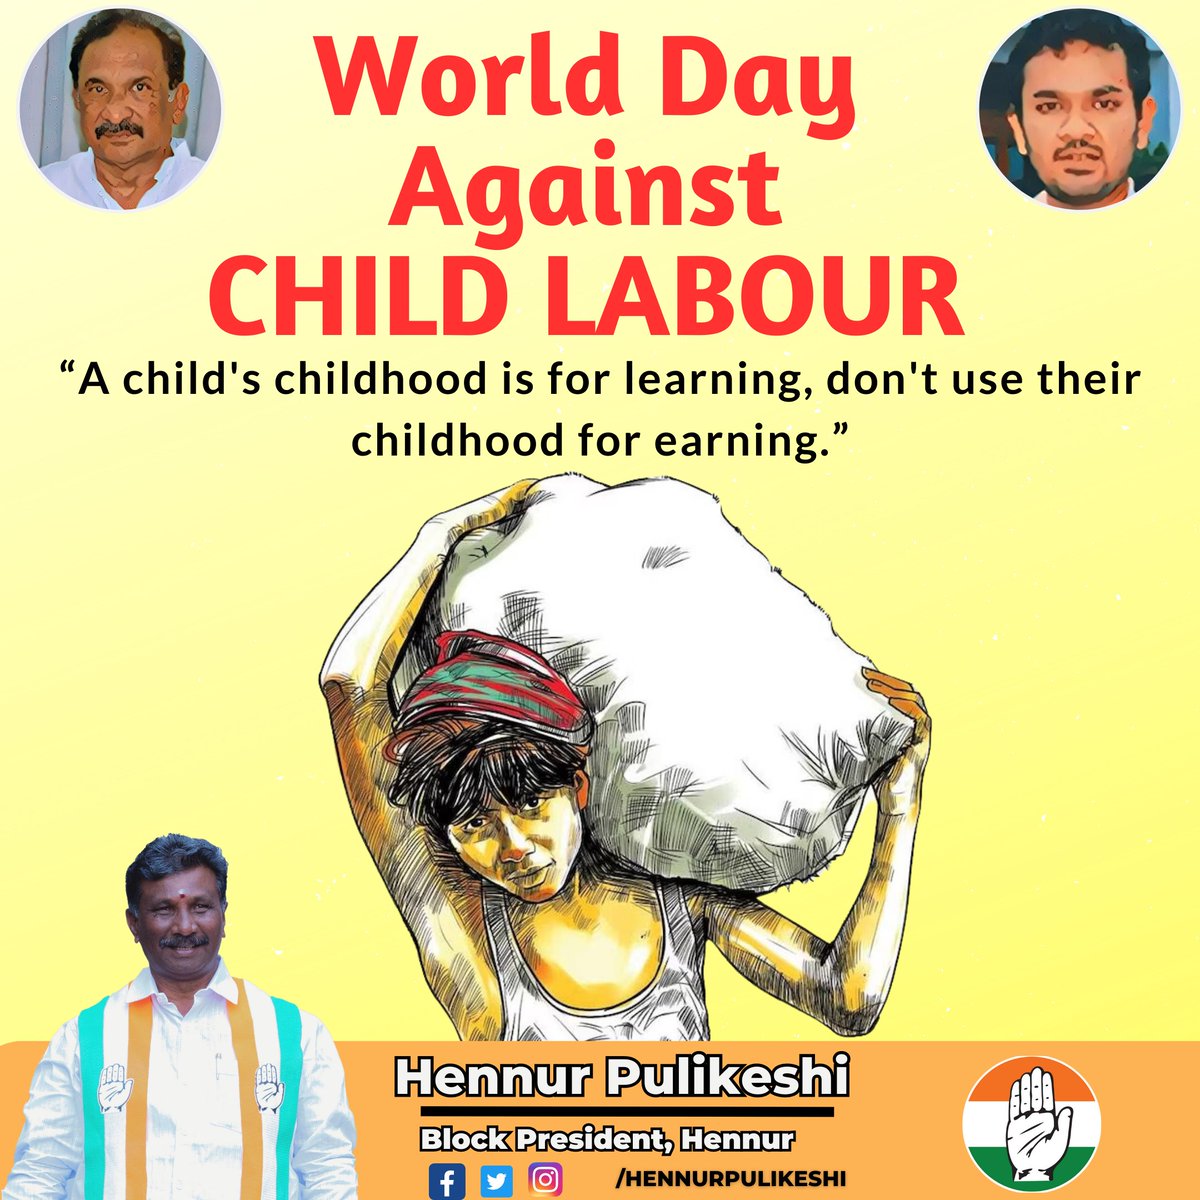 Say NO to child labor! On World Day Against Child Labour, let's unite to protect our future generation. Together, we can create a brighter, child-labor-free world. 🚫👧🚫 #EndChildLabour
#WorldDayAgainstChildLabour #StopExploitation #hennur #teamHP #KJGeorge #sarvagnanagar